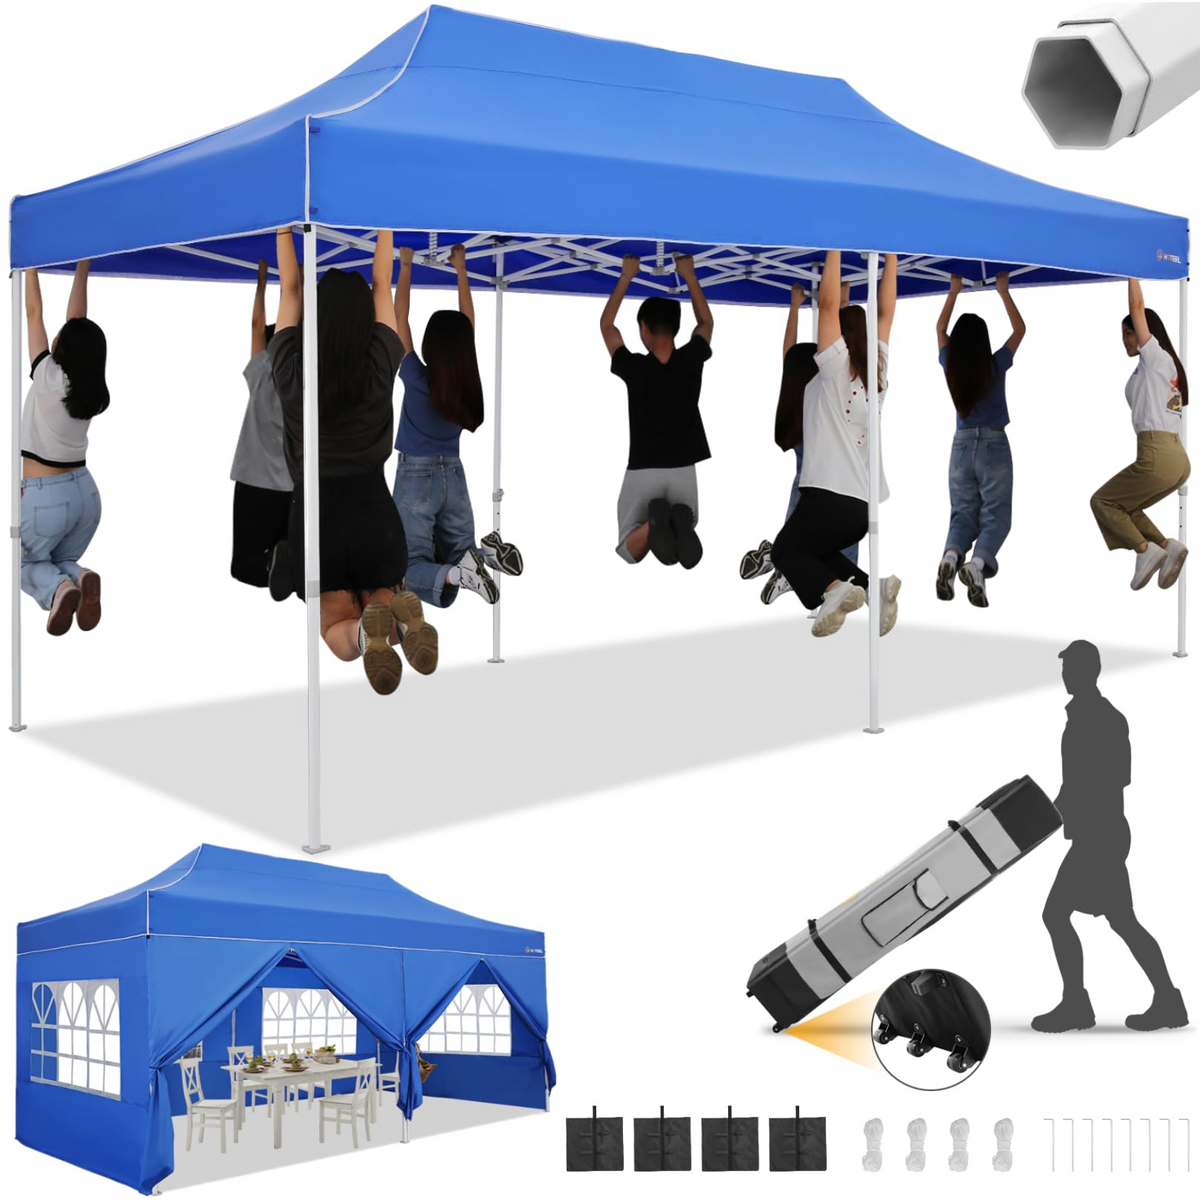 HOTEEL 10x20 Pop up Canopy with 6 Removable Sidewalls Heavy Duty Party Tent Outdoor Event Gazebo Frame Thickened Commercial Canopy Tents for Wedding Parties Camping, Blue